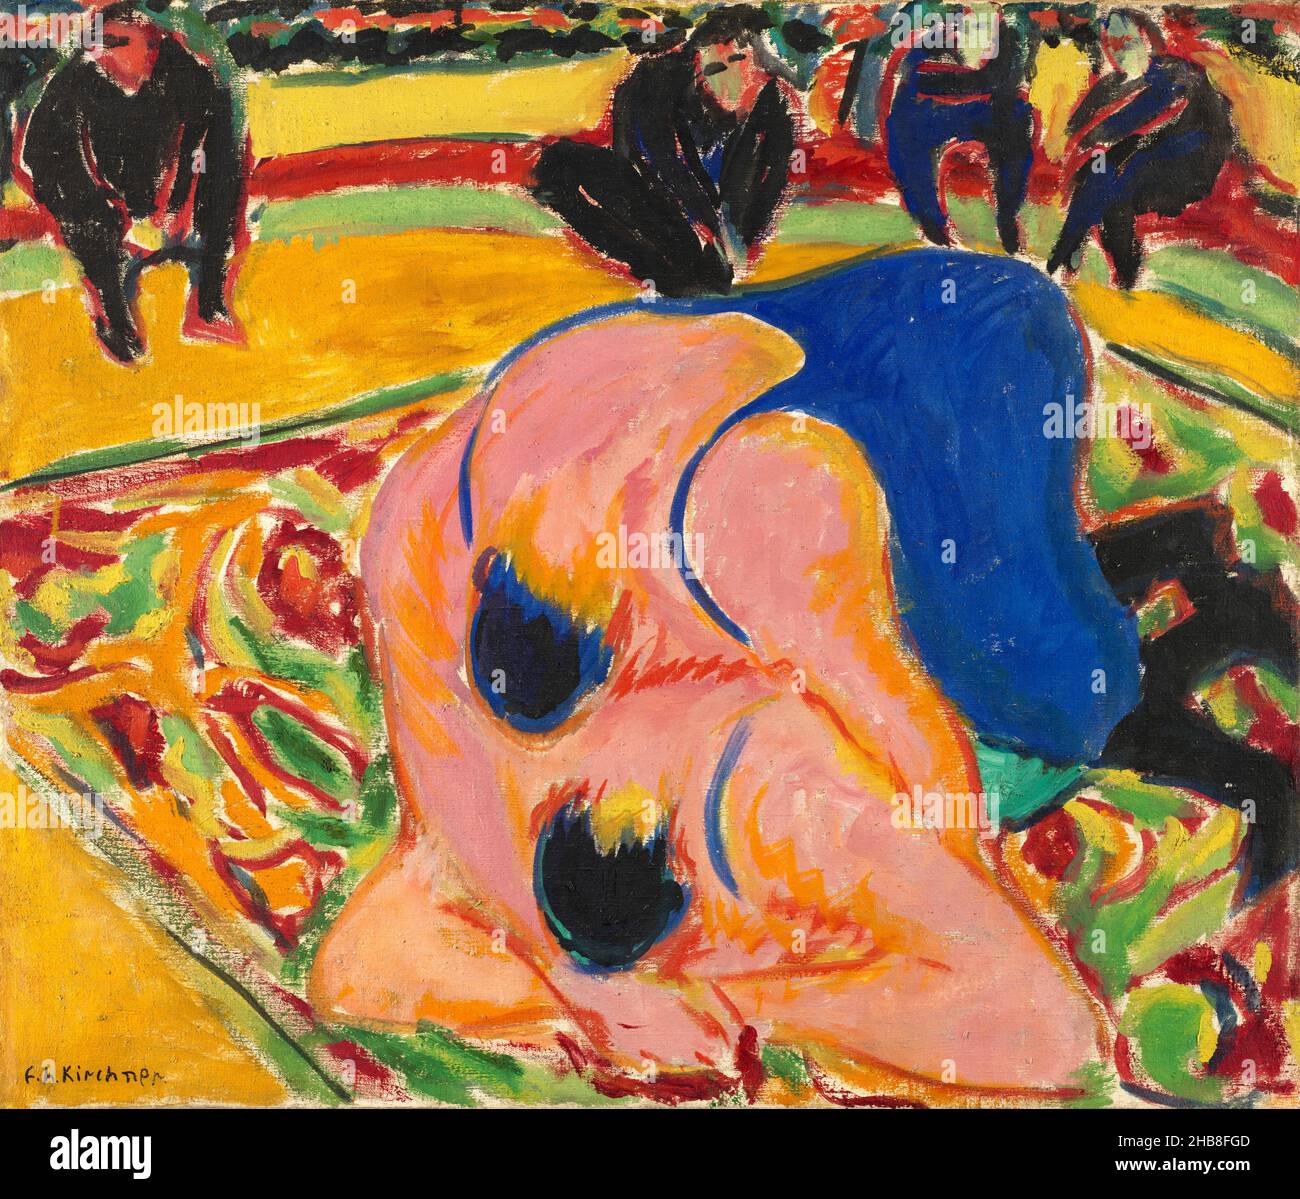 Wrestlers in a Circus by Ernst Ludwig Kirchner (1880-1938), oil on canvas, 1909 Stock Photo